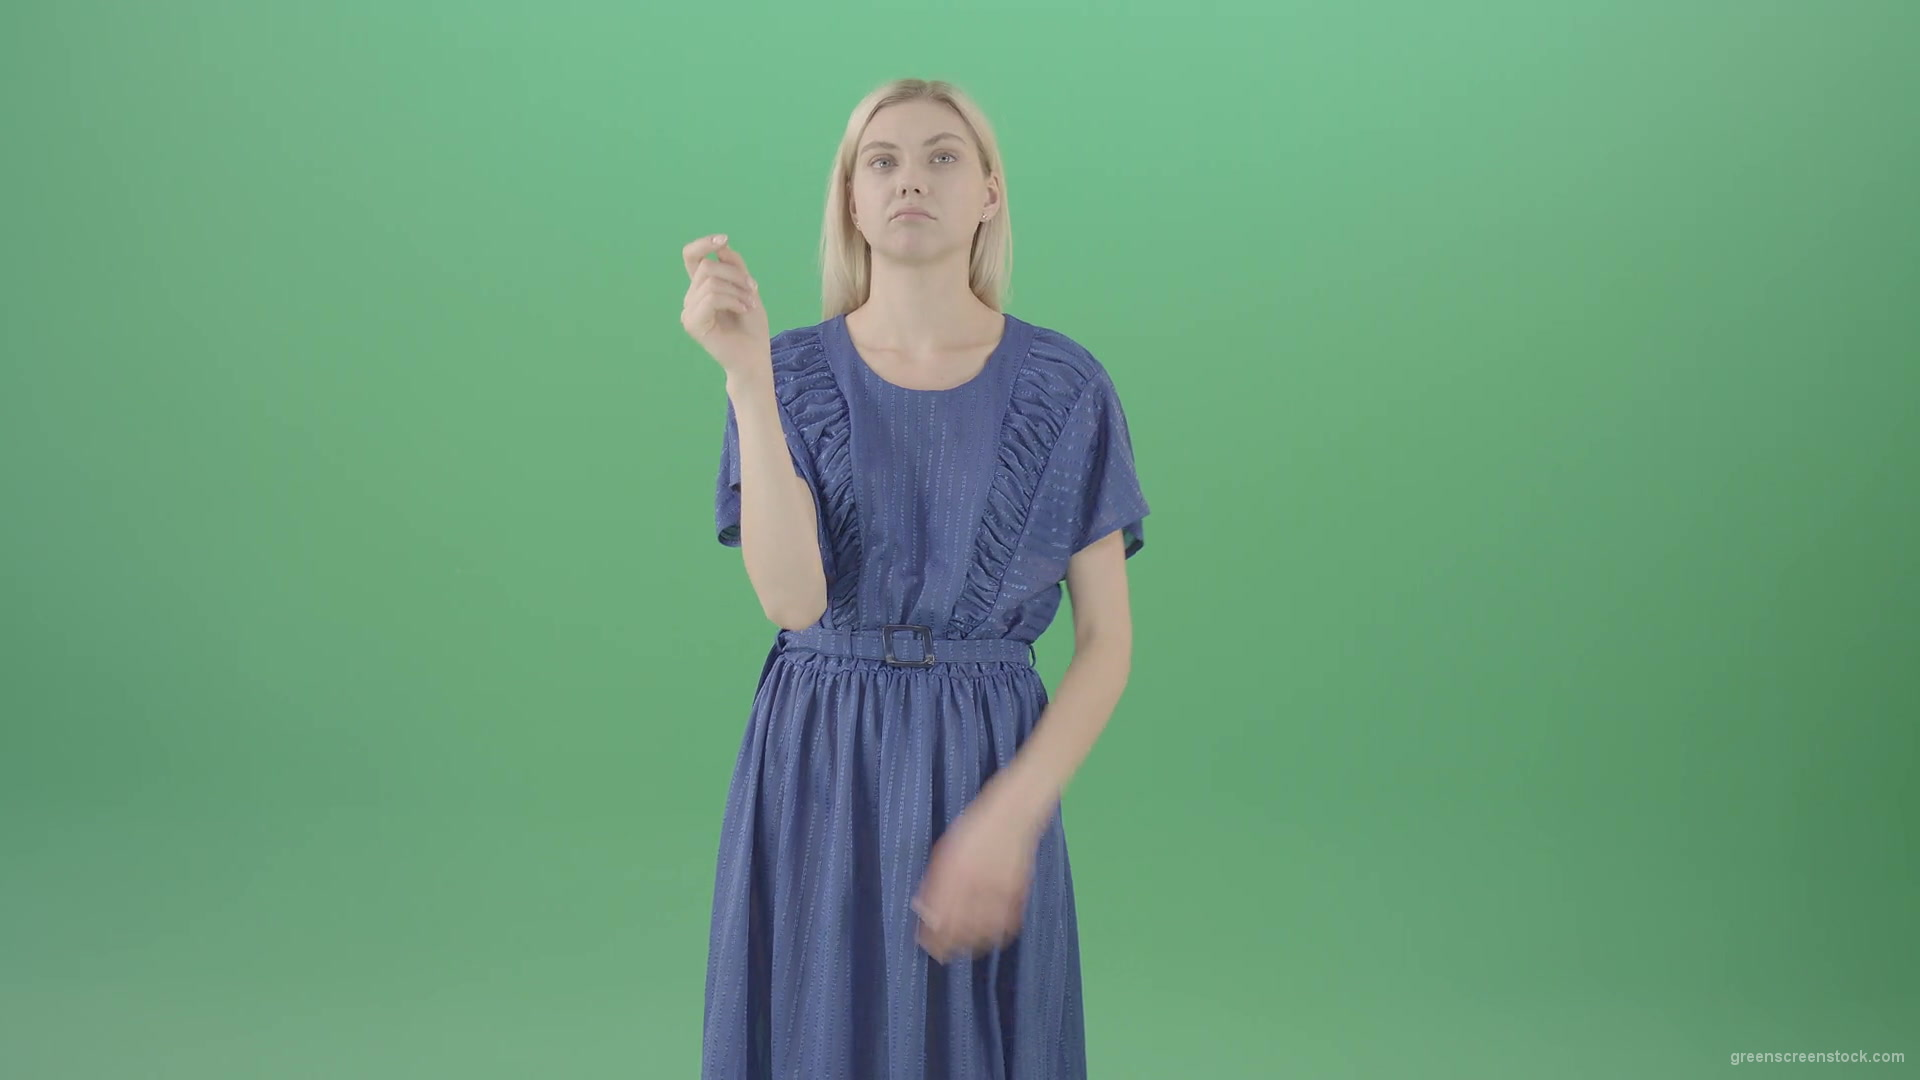 Boring-blonde-girl-in-blue-costume-can-not-find-virtual-products-on-touch-screen-isolated-on-green-background-4K-Video-Footage--1920_005 Green Screen Stock